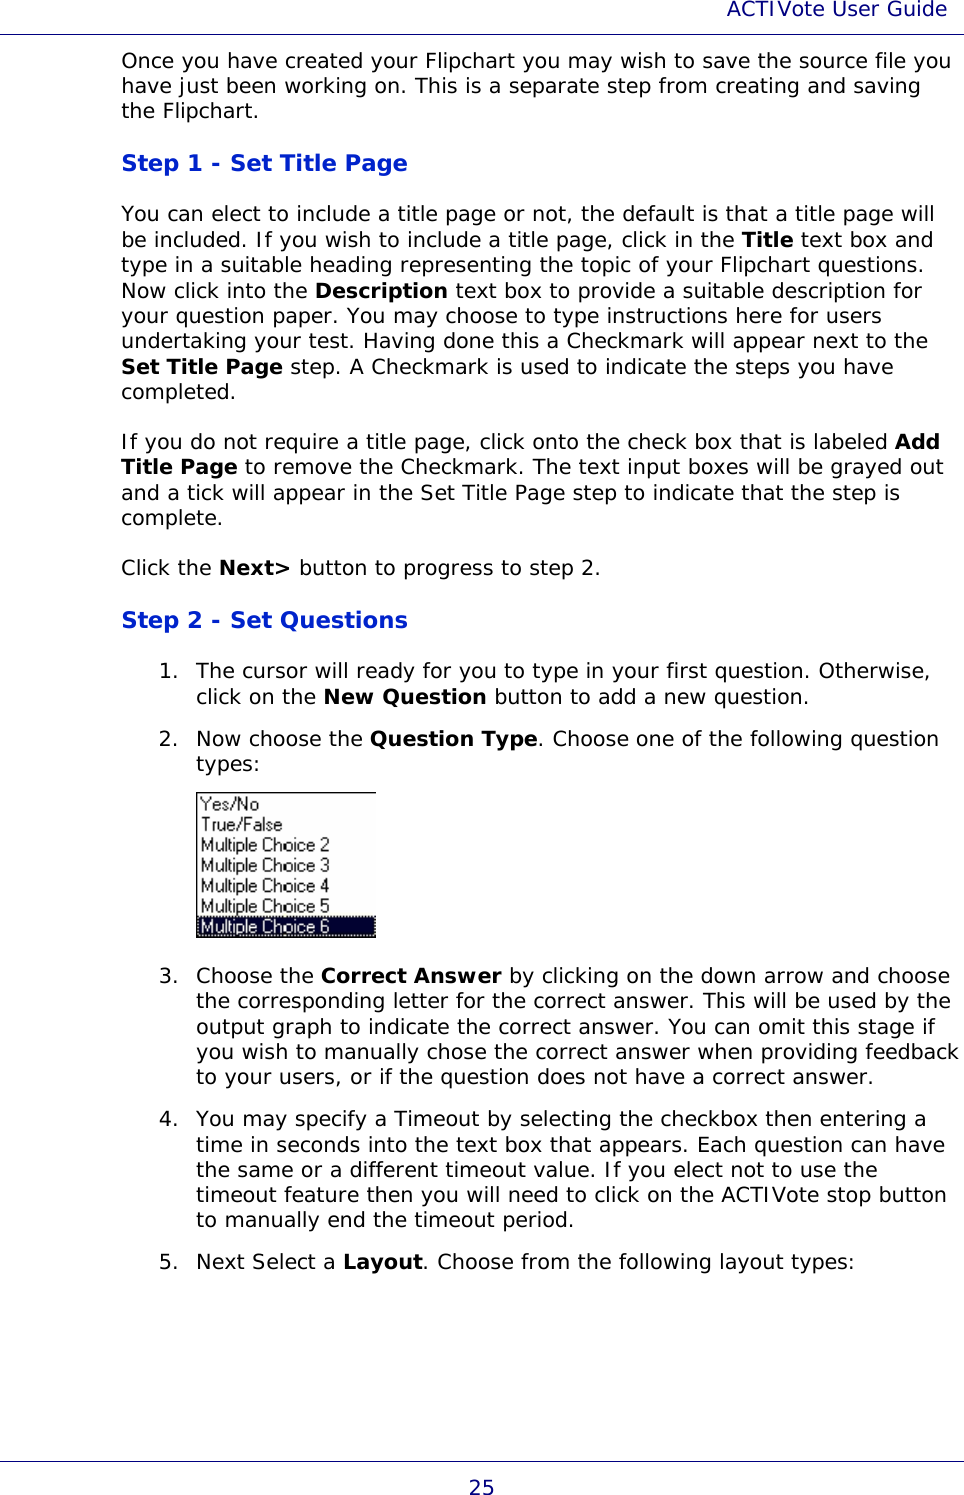 ACTIVote User Guide 25 Once you have created your Flipchart you may wish to save the source file you have just been working on. This is a separate step from creating and saving the Flipchart. Step 1 - Set Title Page You can elect to include a title page or not, the default is that a title page will be included. If you wish to include a title page, click in the Title text box and type in a suitable heading representing the topic of your Flipchart questions. Now click into the Description text box to provide a suitable description for your question paper. You may choose to type instructions here for users undertaking your test. Having done this a Checkmark will appear next to the Set Title Page step. A Checkmark is used to indicate the steps you have completed. If you do not require a title page, click onto the check box that is labeled Add Title Page to remove the Checkmark. The text input boxes will be grayed out and a tick will appear in the Set Title Page step to indicate that the step is complete. Click the Next&gt; button to progress to step 2. Step 2 - Set Questions 1. The cursor will ready for you to type in your first question. Otherwise, click on the New Question button to add a new question. 2. Now choose the Question Type. Choose one of the following question types:  3. Choose the Correct Answer by clicking on the down arrow and choose the corresponding letter for the correct answer. This will be used by the output graph to indicate the correct answer. You can omit this stage if you wish to manually chose the correct answer when providing feedback to your users, or if the question does not have a correct answer. 4. You may specify a Timeout by selecting the checkbox then entering a time in seconds into the text box that appears. Each question can have the same or a different timeout value. If you elect not to use the timeout feature then you will need to click on the ACTIVote stop button to manually end the timeout period. 5. Next Select a Layout. Choose from the following layout types: 